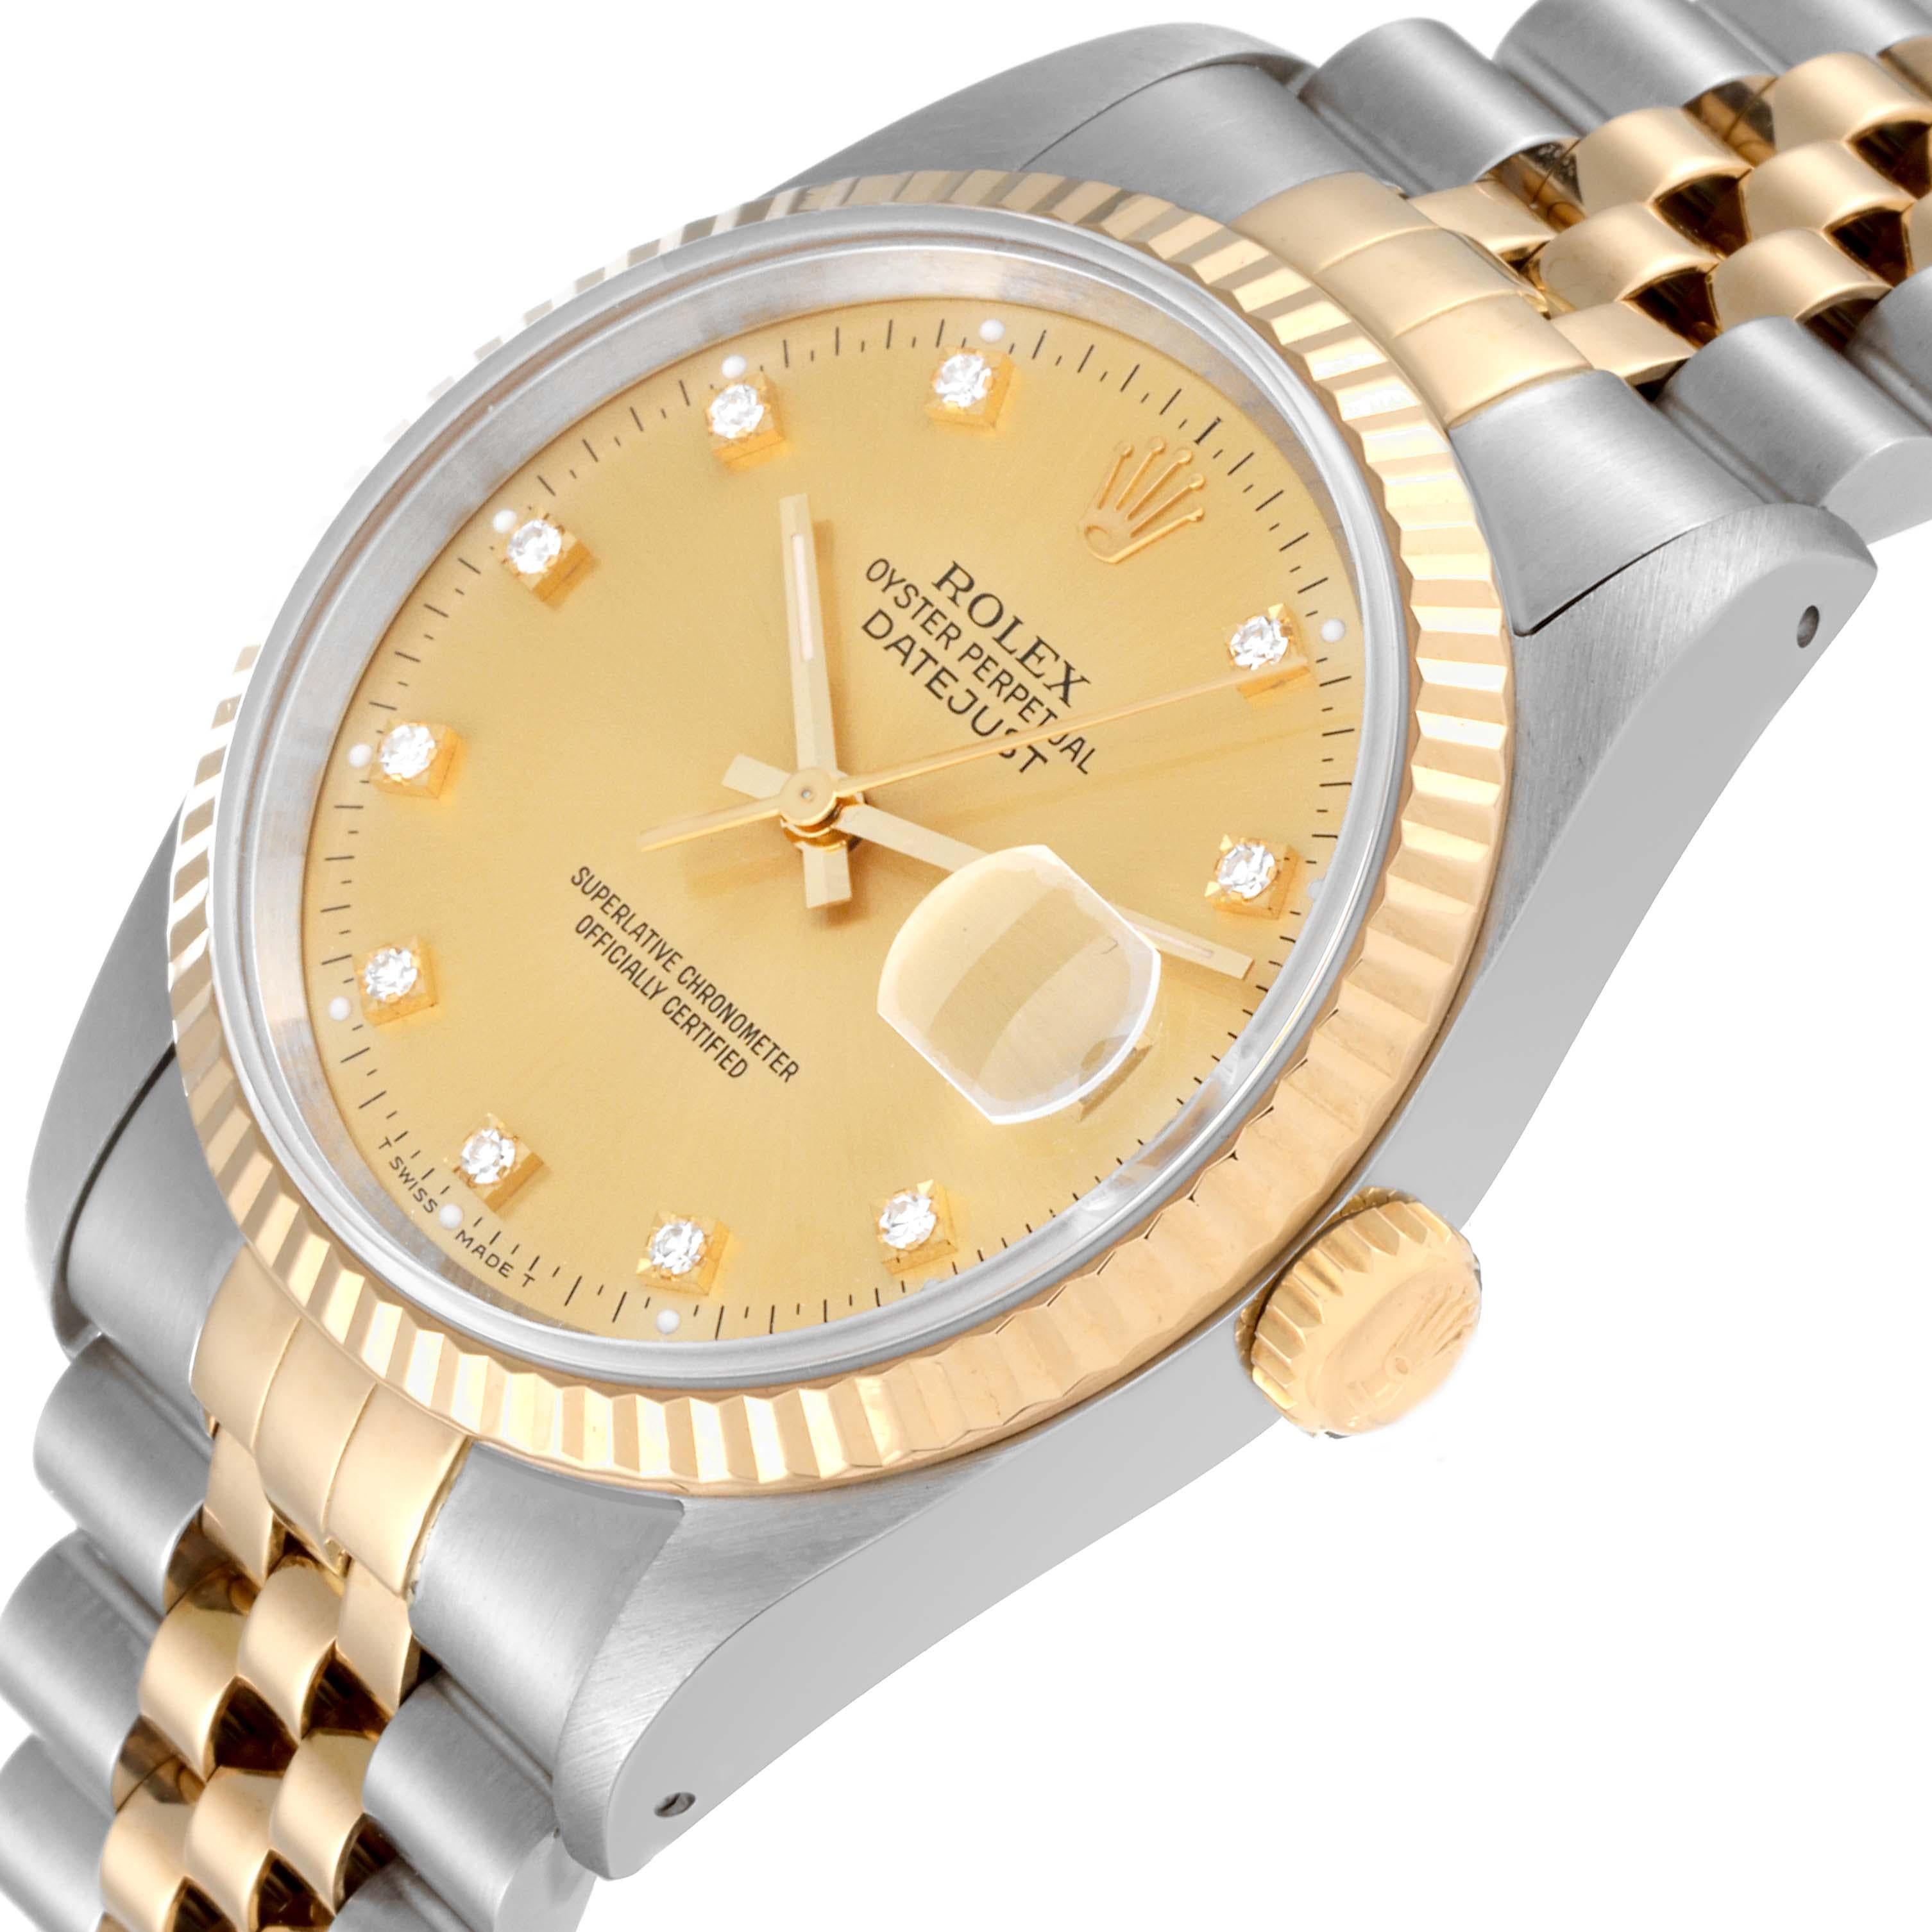 Rolex Datejust Champagne Diamond Dial Steel Yellow Gold Mens Watch 16233 In Good Condition For Sale In Atlanta, GA